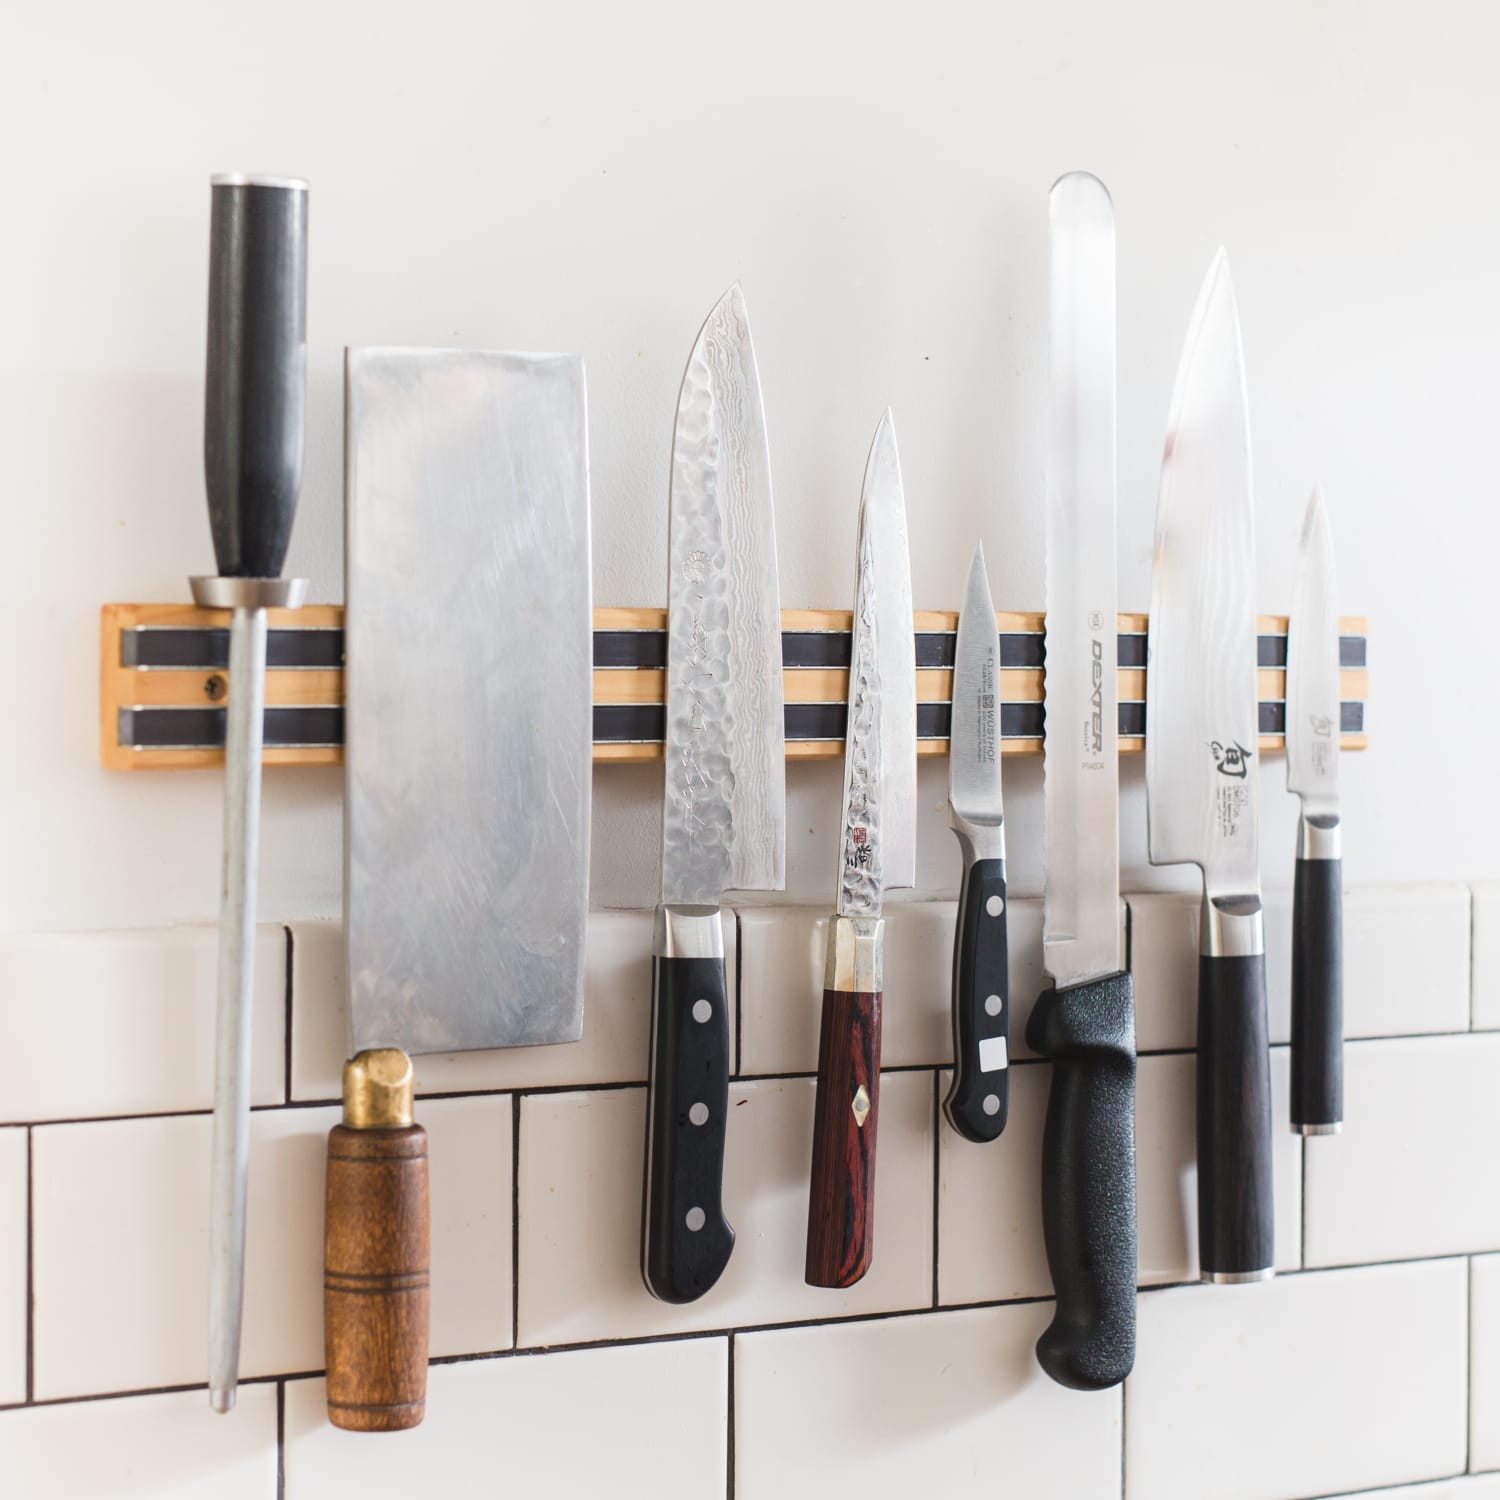 Windswept insulator stabil 10 Places to Hang a Magnetic Knife Rack | The Kitchn